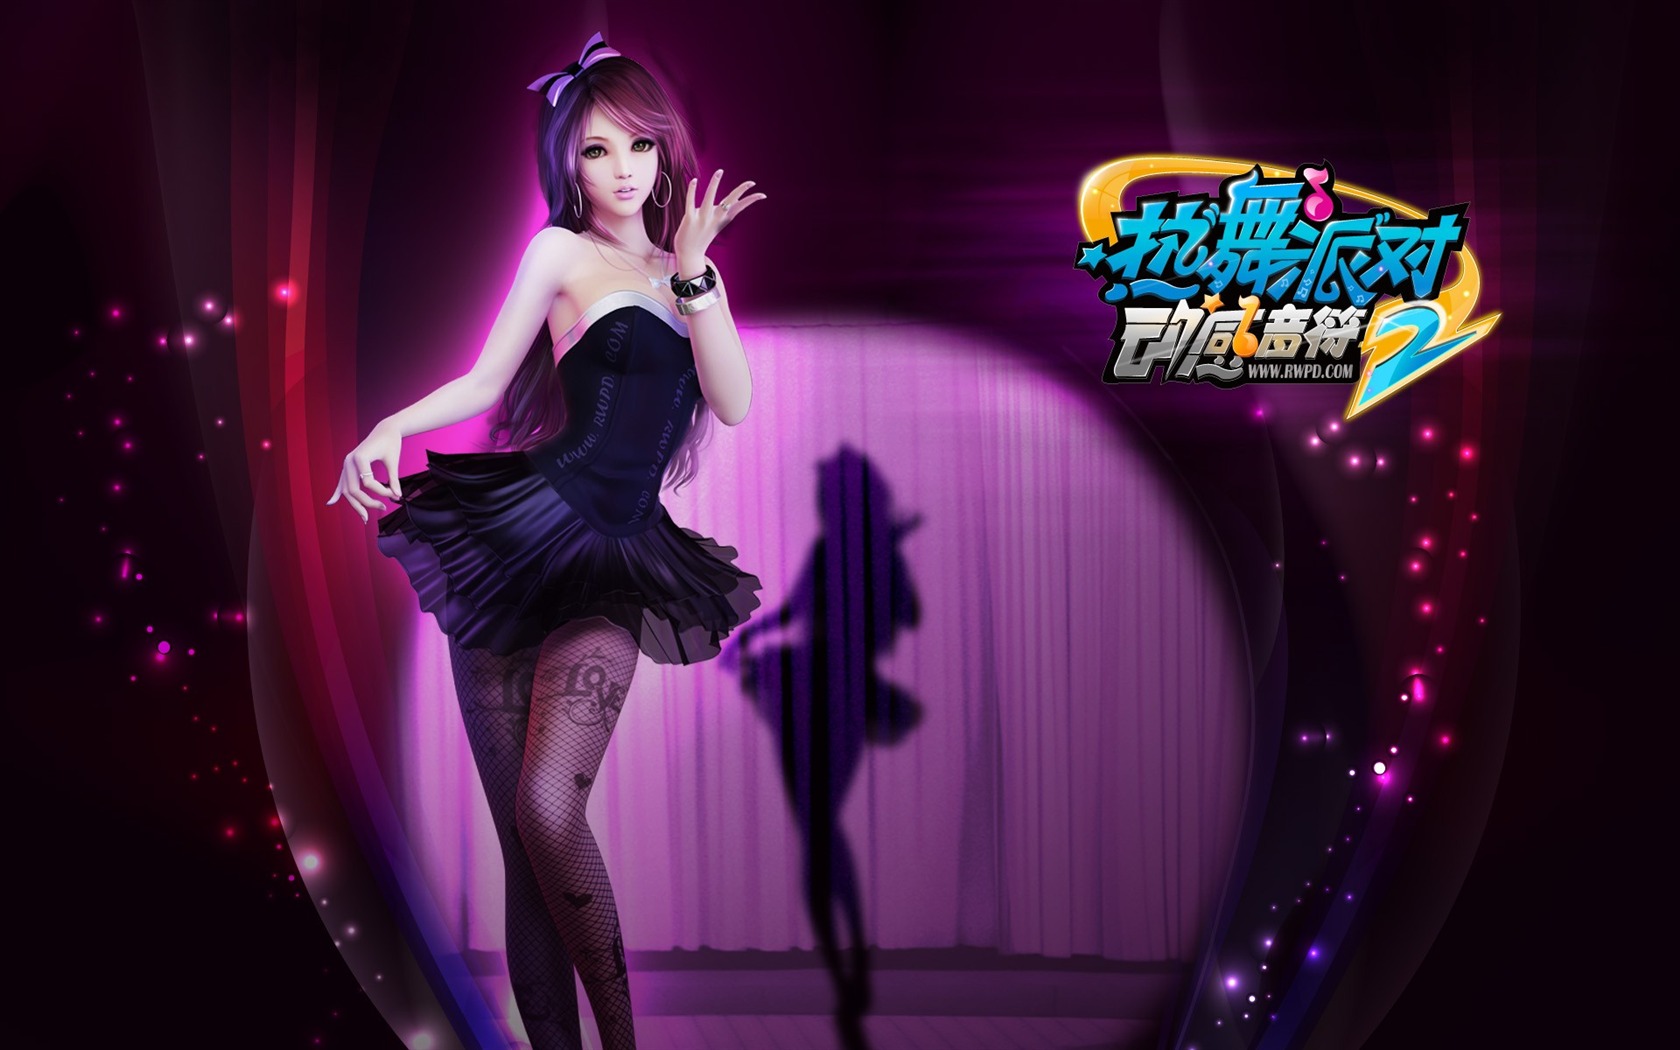 Online game Hot Dance Party II official wallpapers #29 - 1680x1050